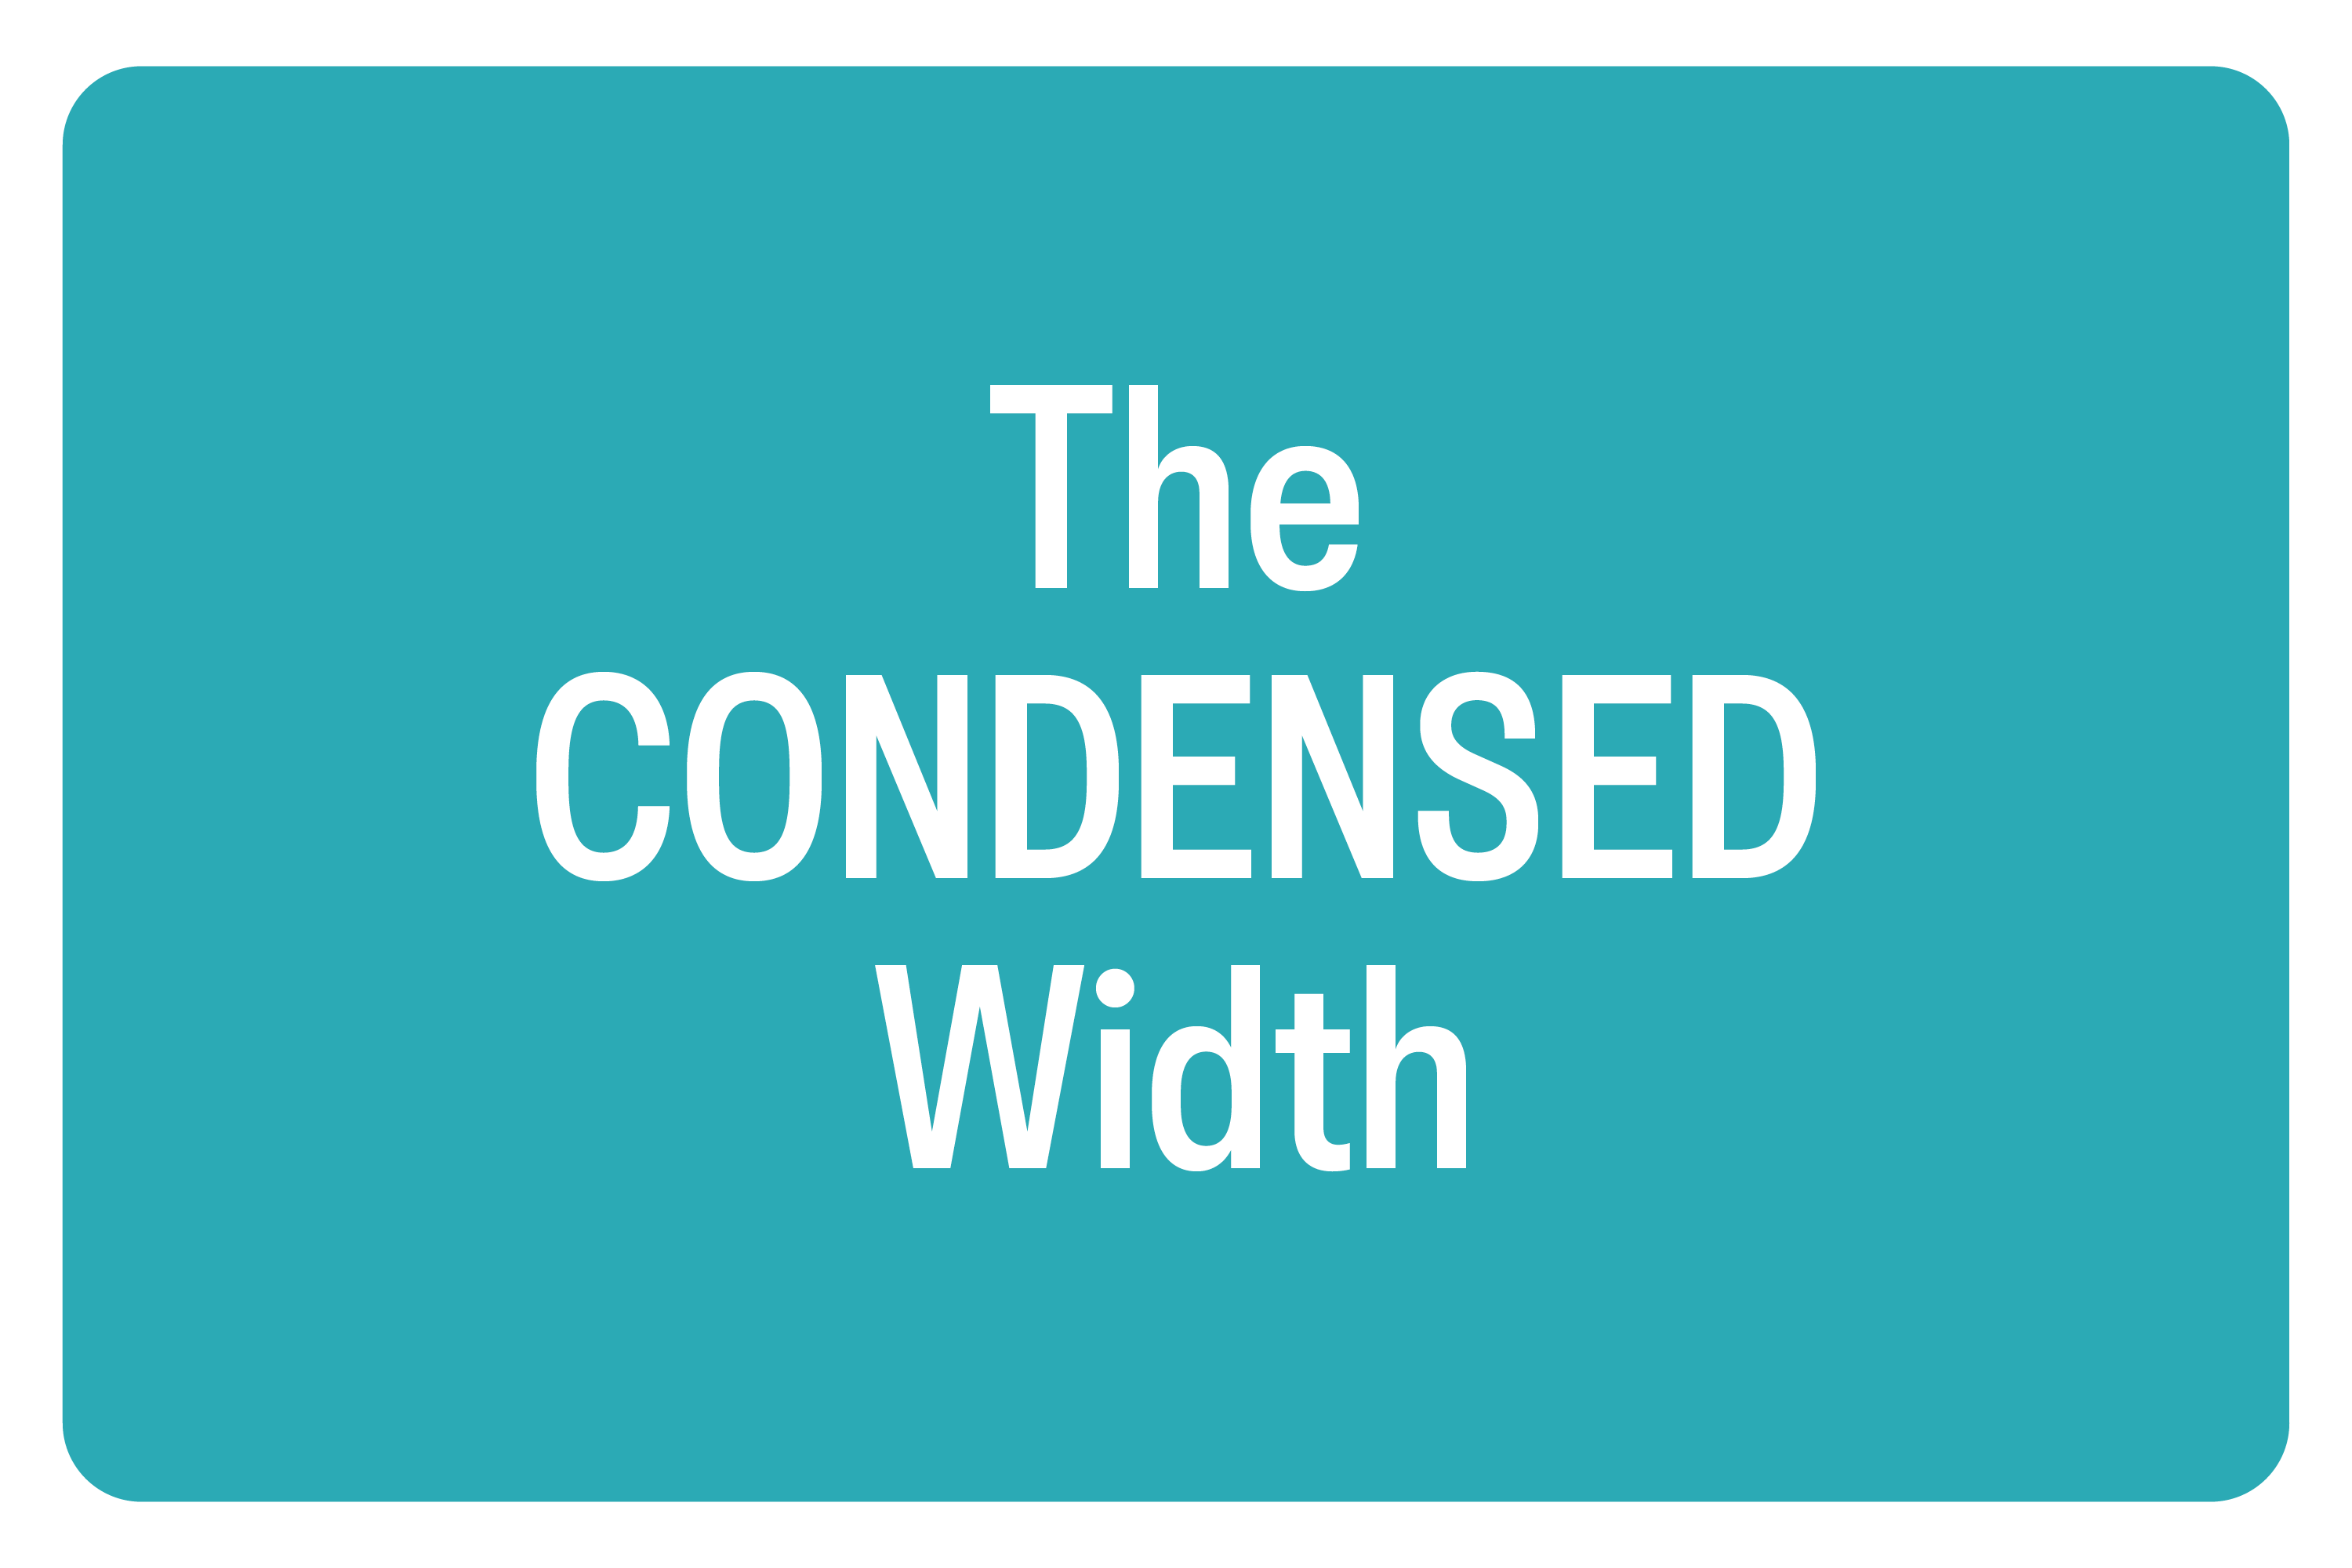 The CONDENSED Width